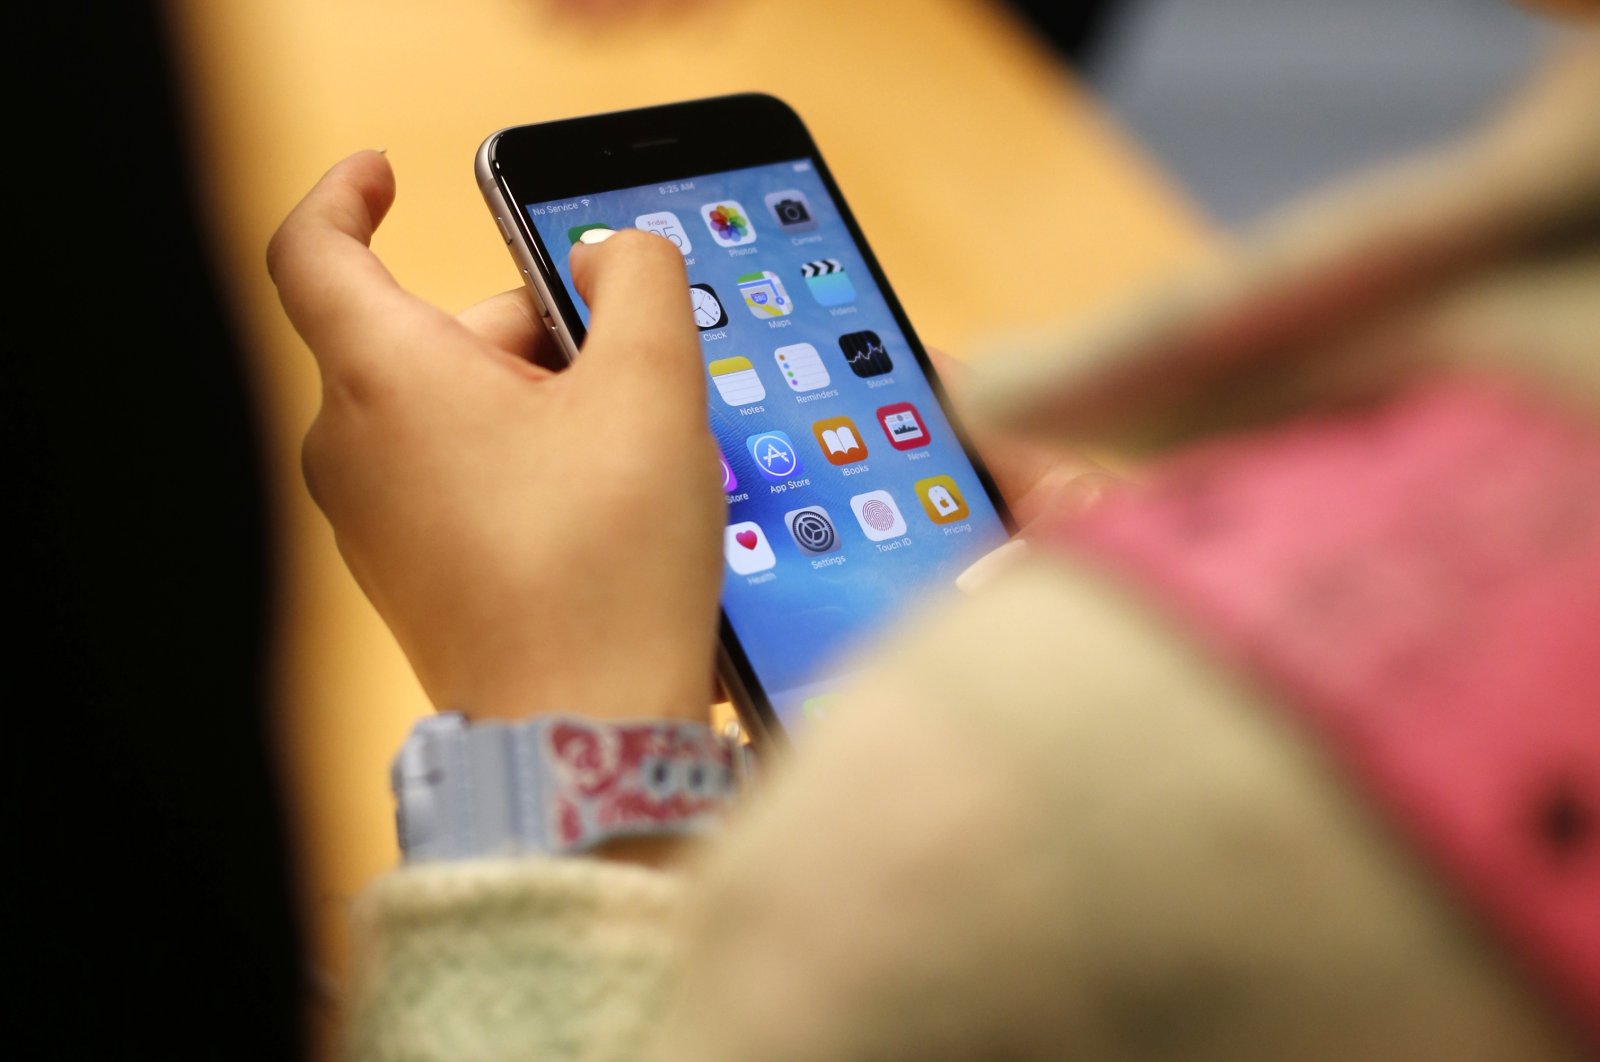 A child holds an iPhone at an Apple store in Chicago, U.S., Sept. 25, 2015. (AP Photo)